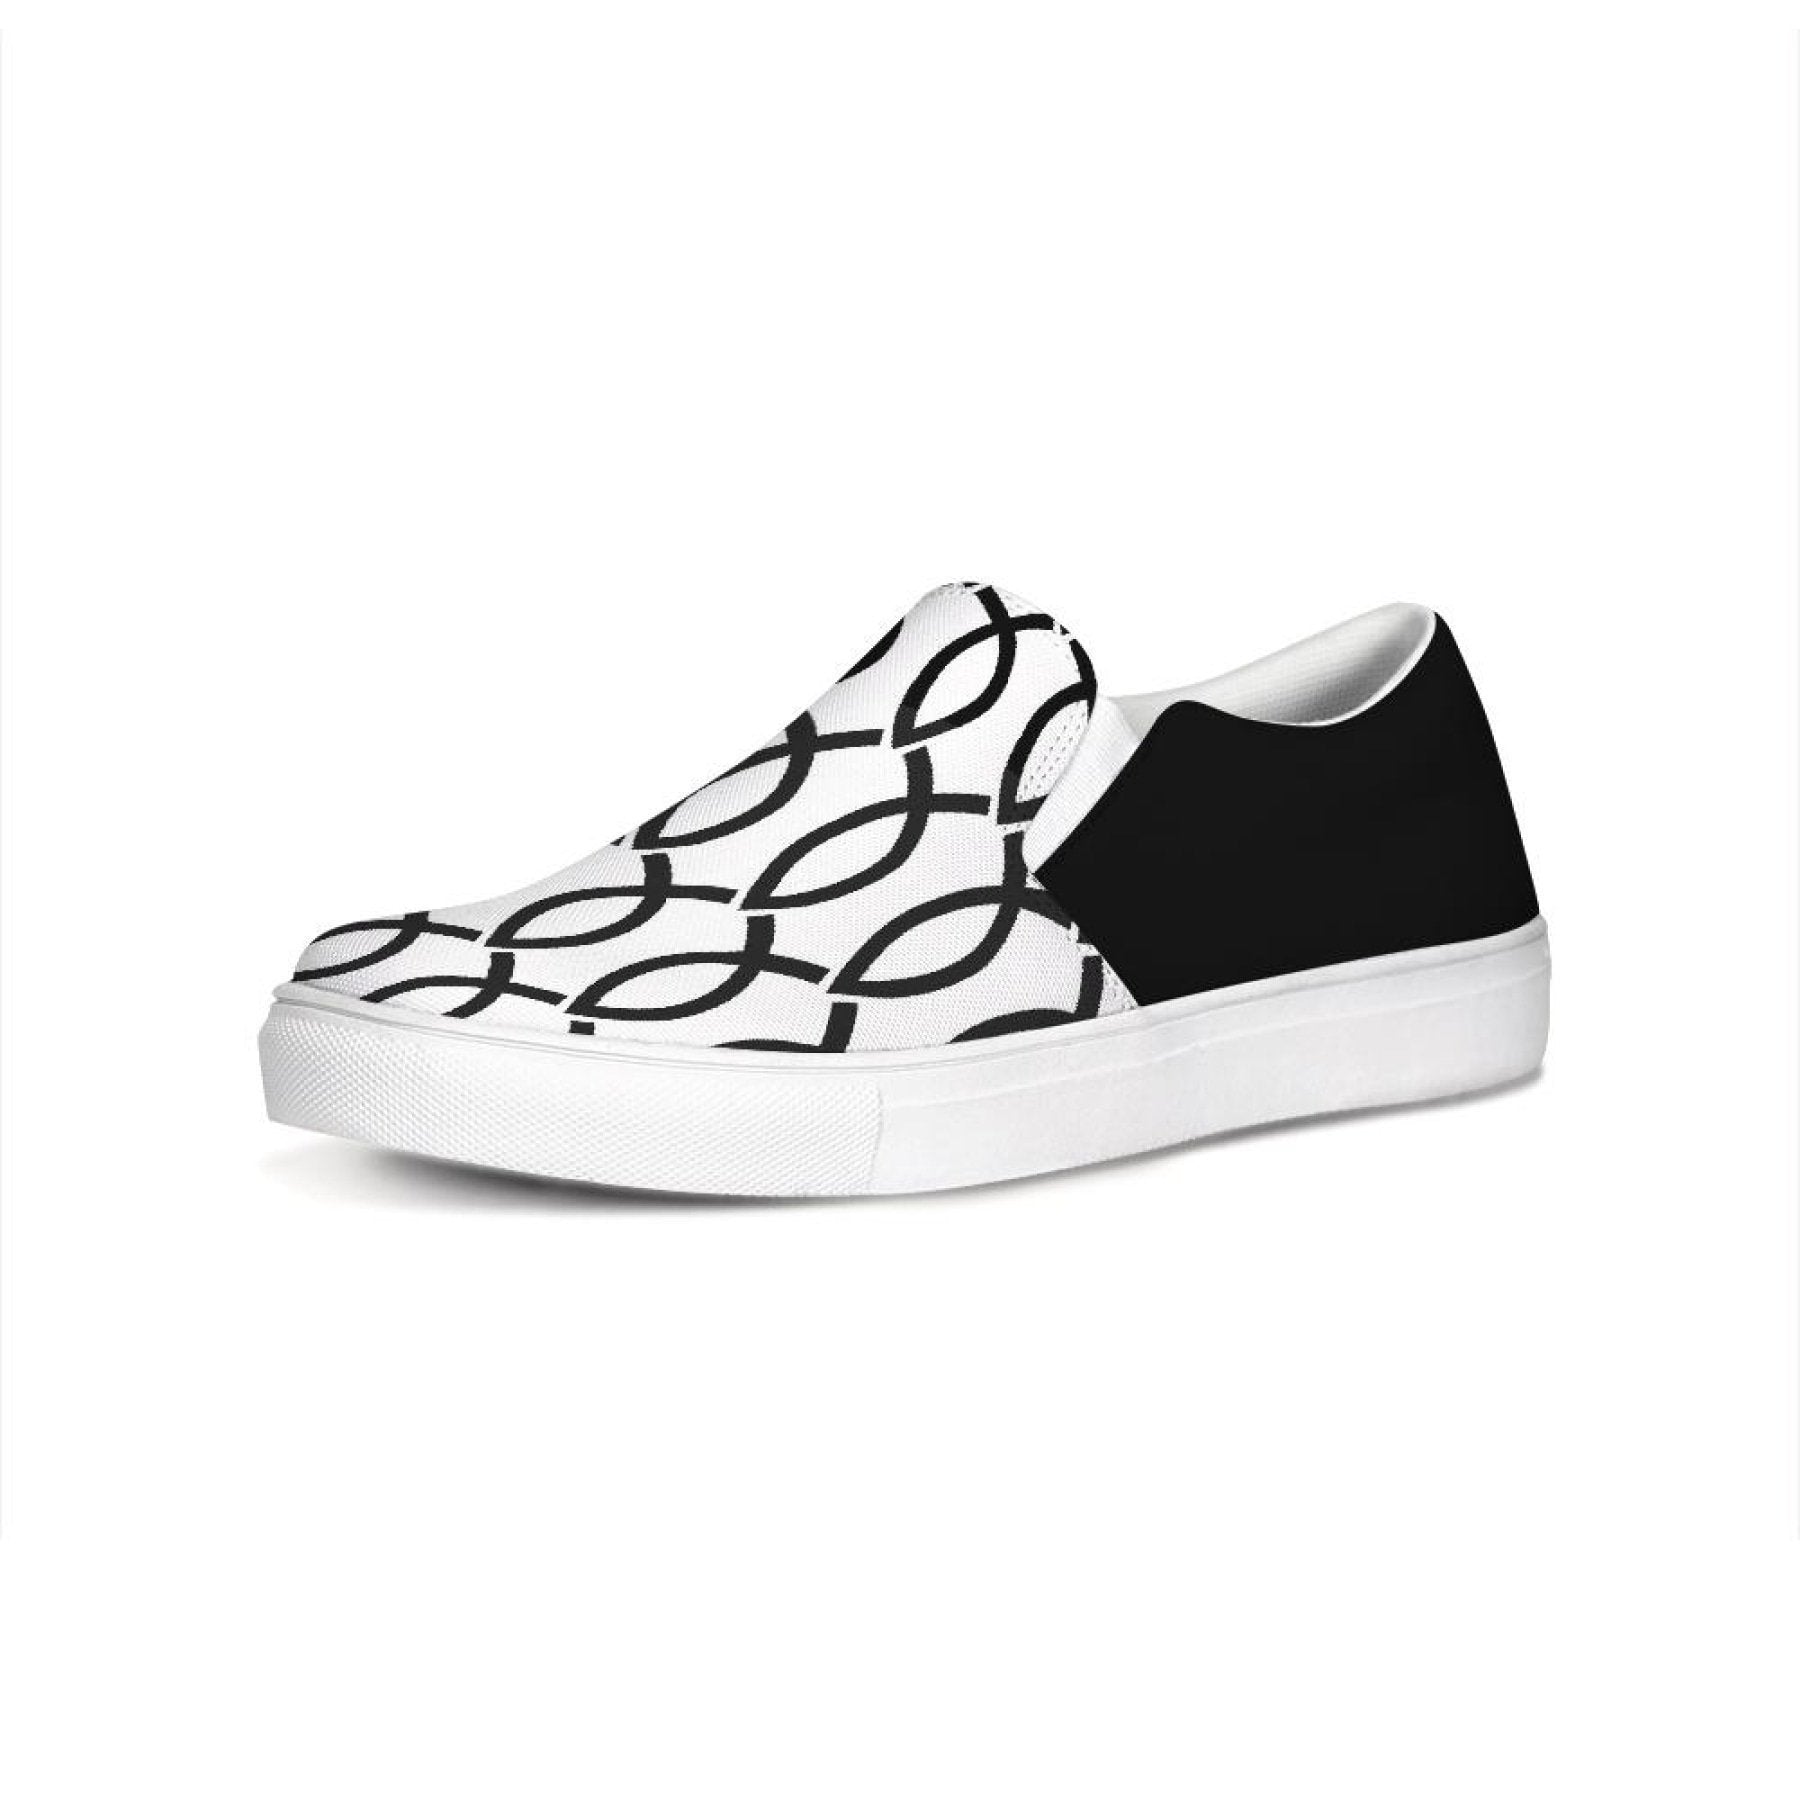 Black & White Canvas Slip On Shoes Grey Coco